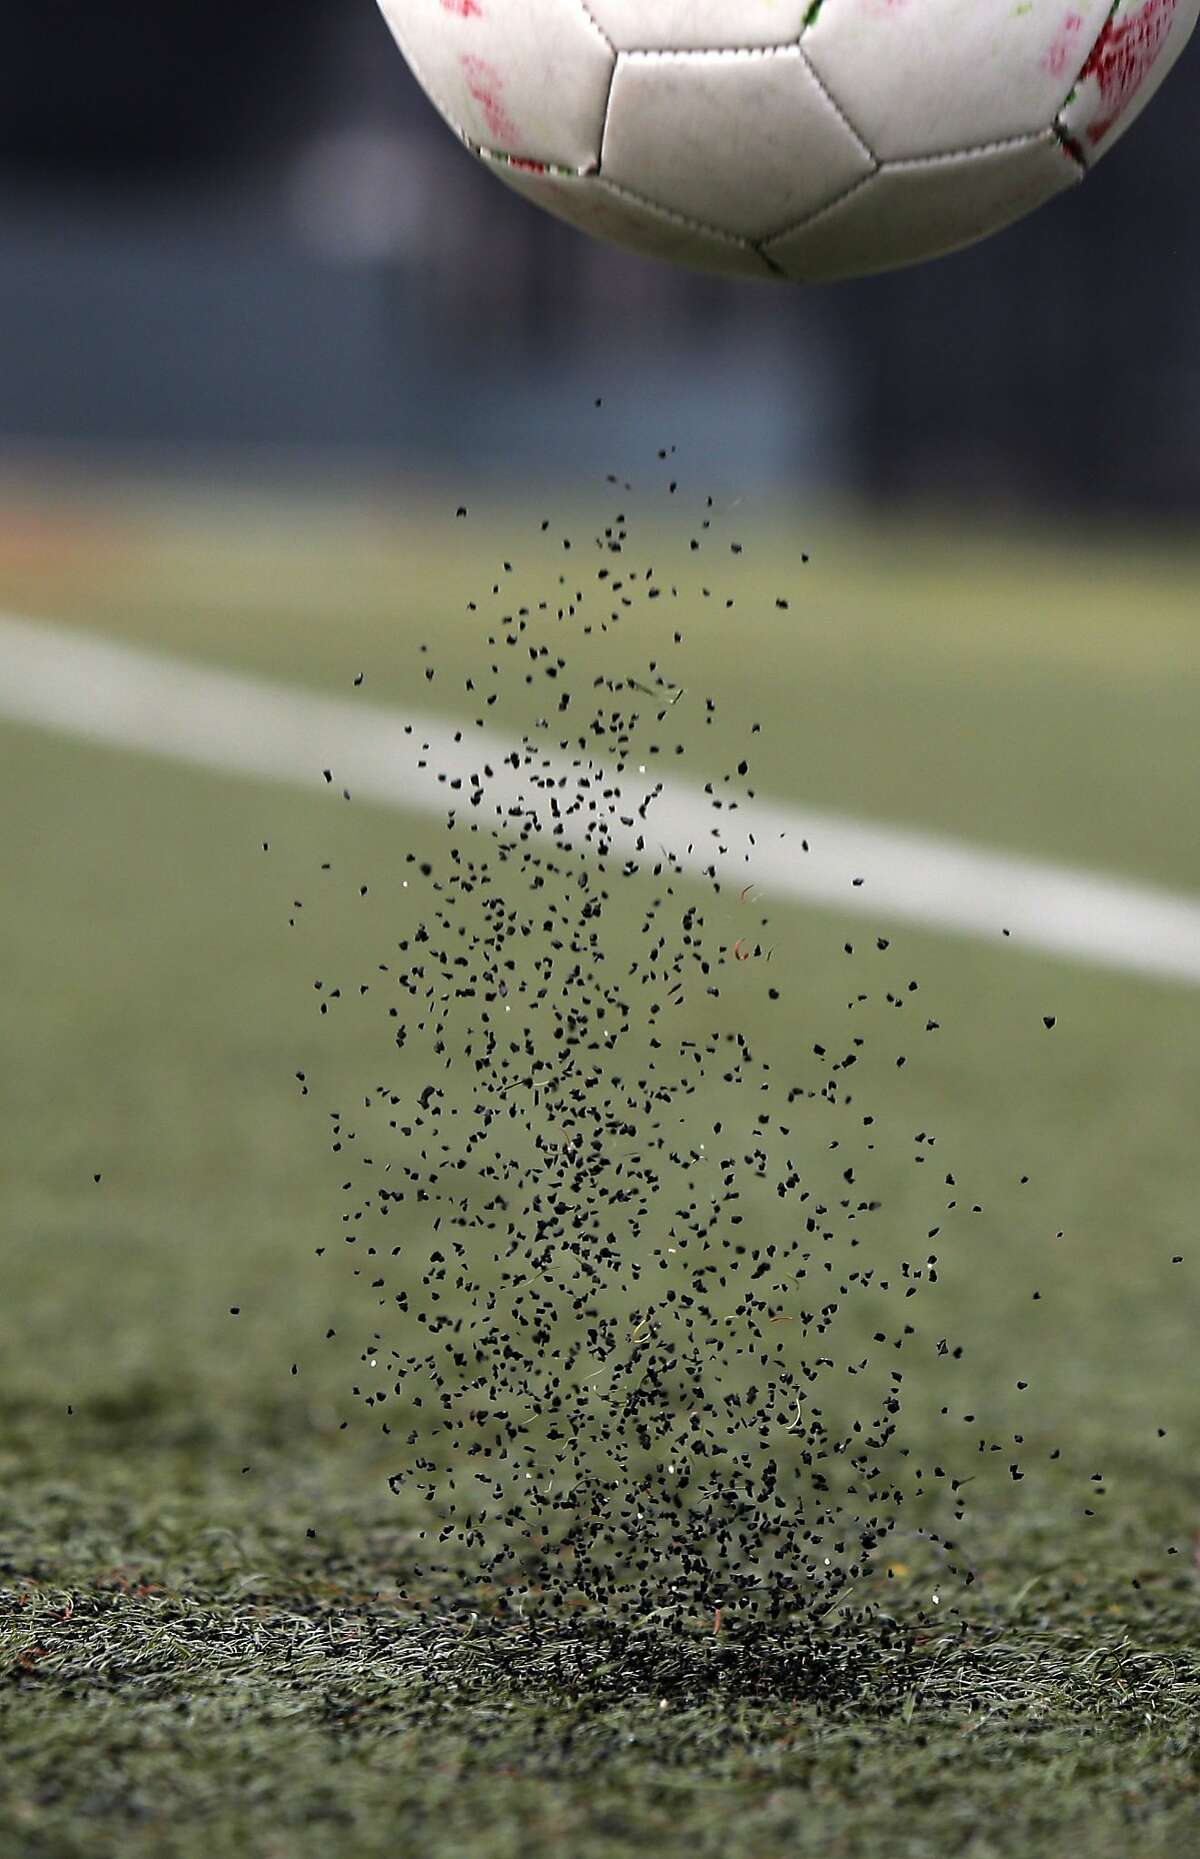 Kathleen McCowin bounces a soccer ball on the synthetic soccer field, at South Sunset Park, in San Francisco, Calif., to demonstrate the movement of the rubber material contained in the turf as seen on Fri. Jan. 16, 2015.